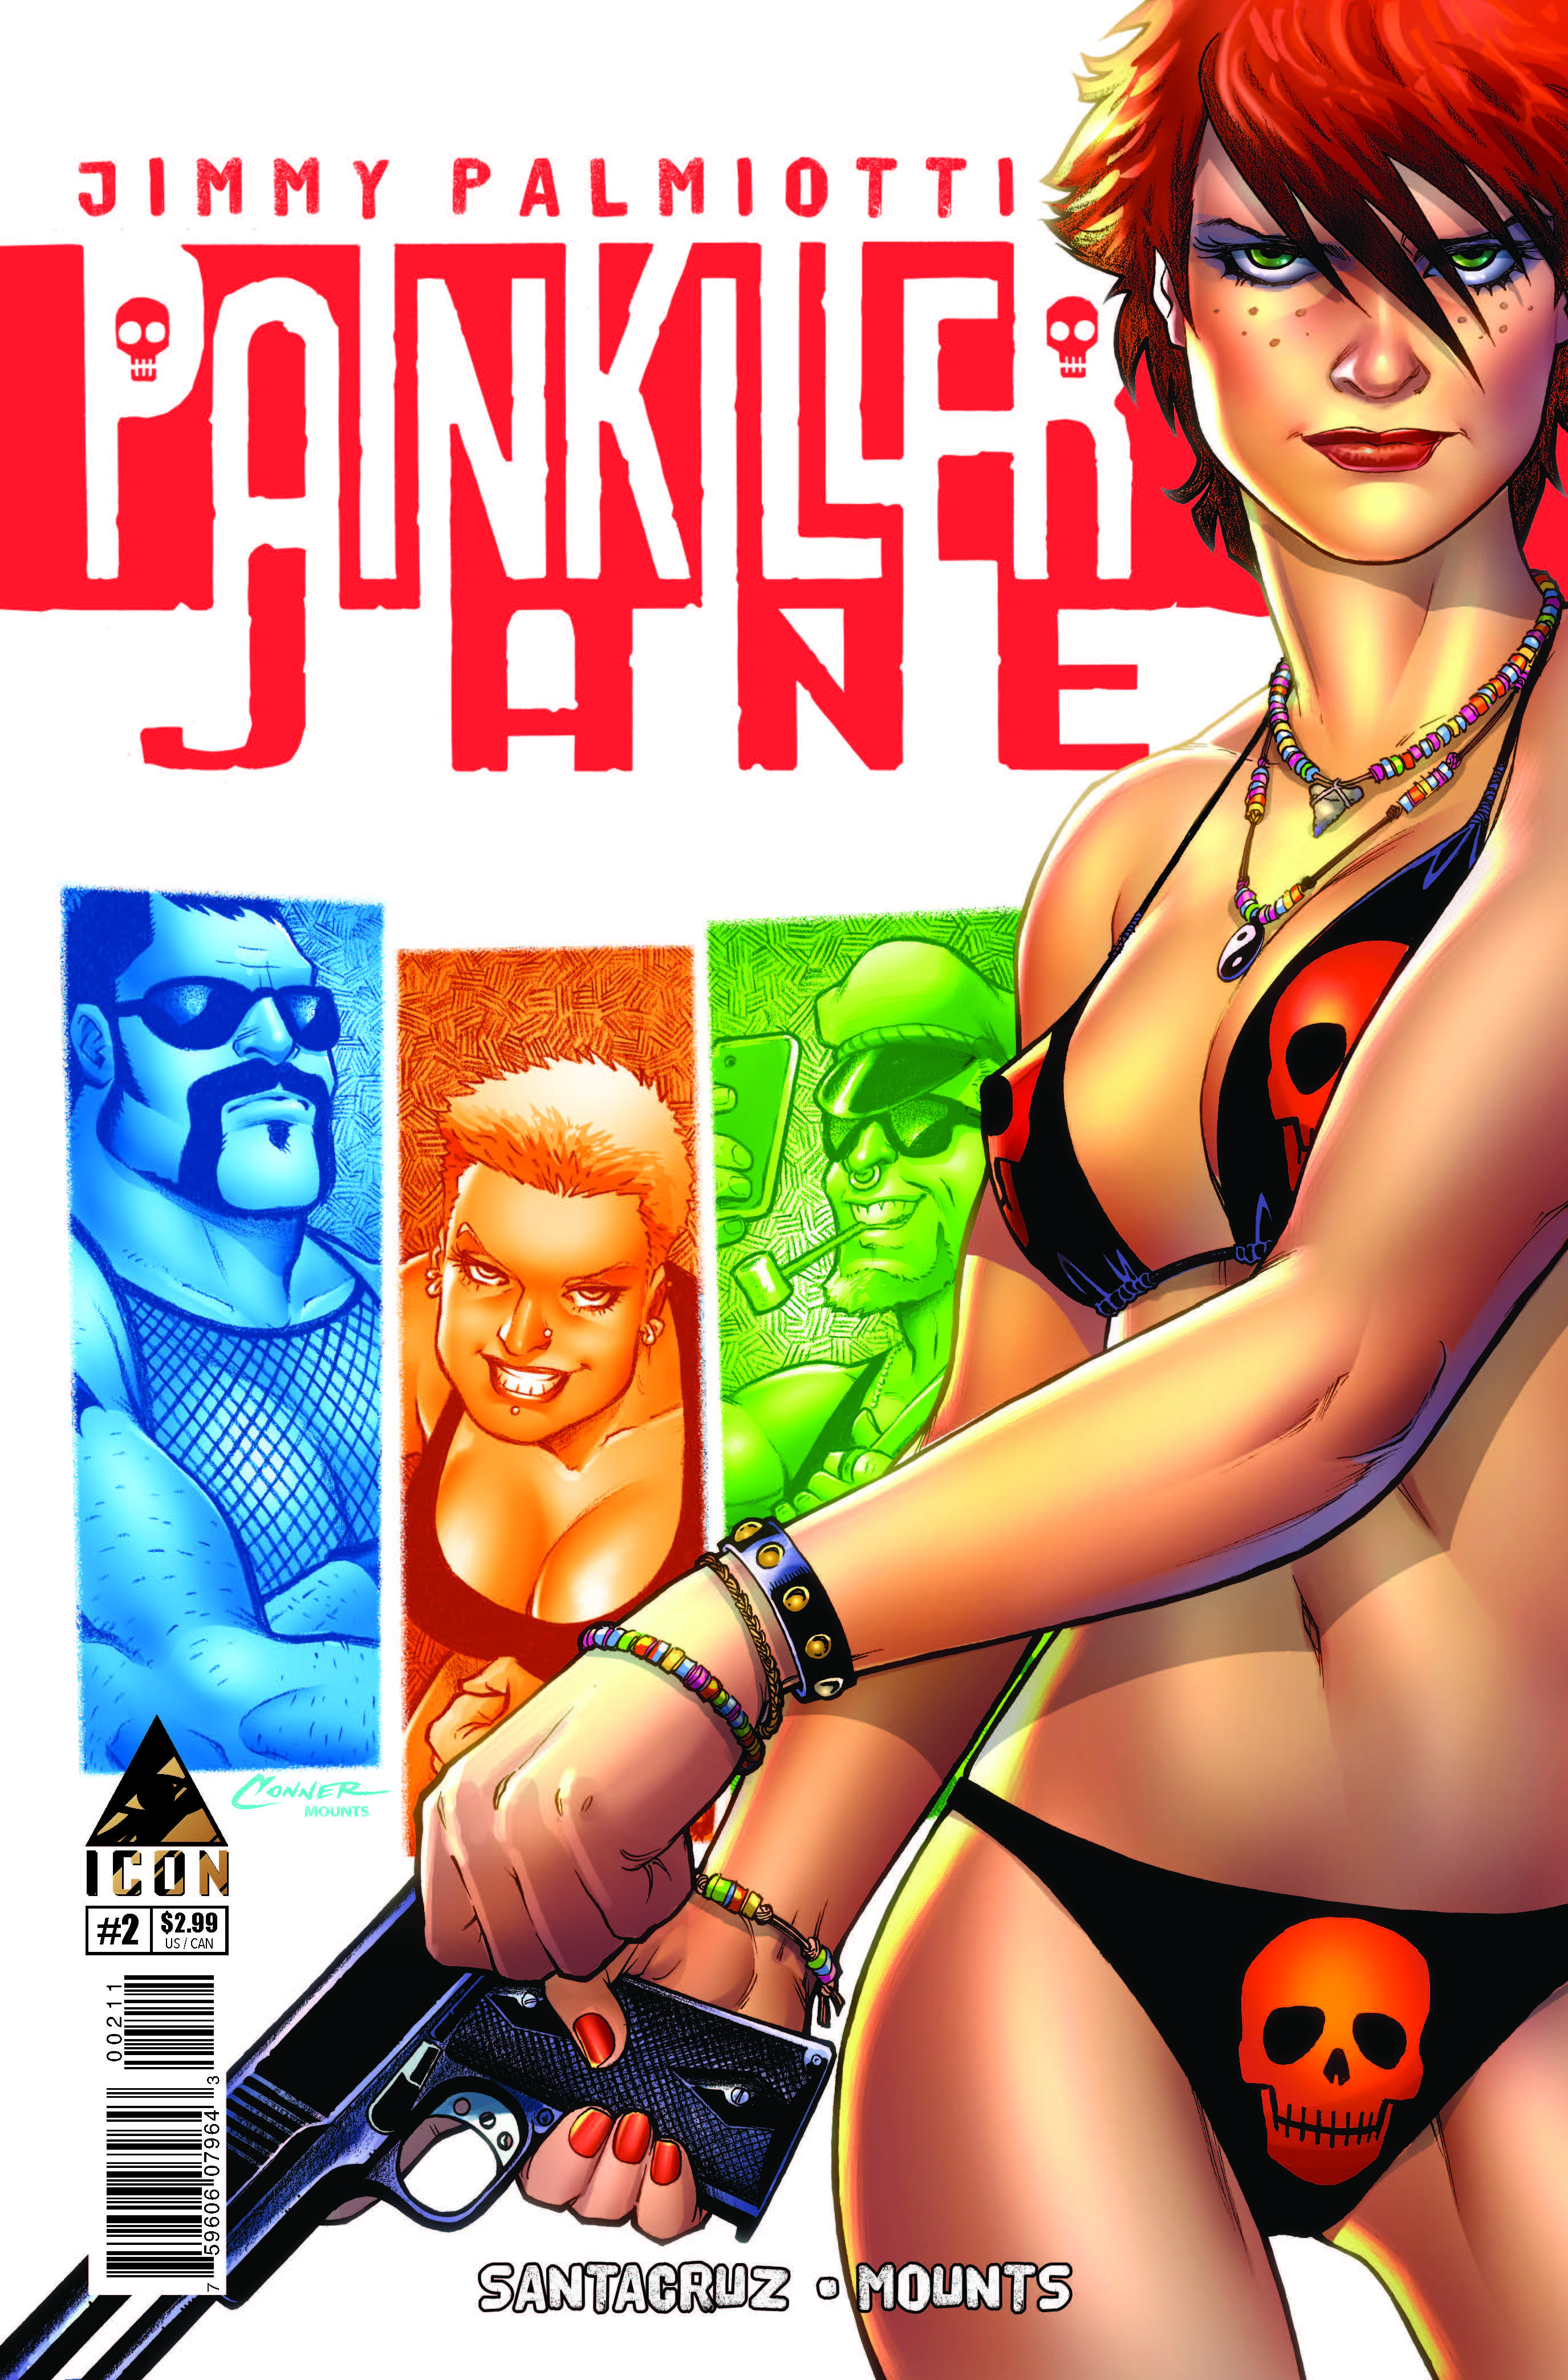 Painkiller Jane: The Price of Freedom (2013) #2